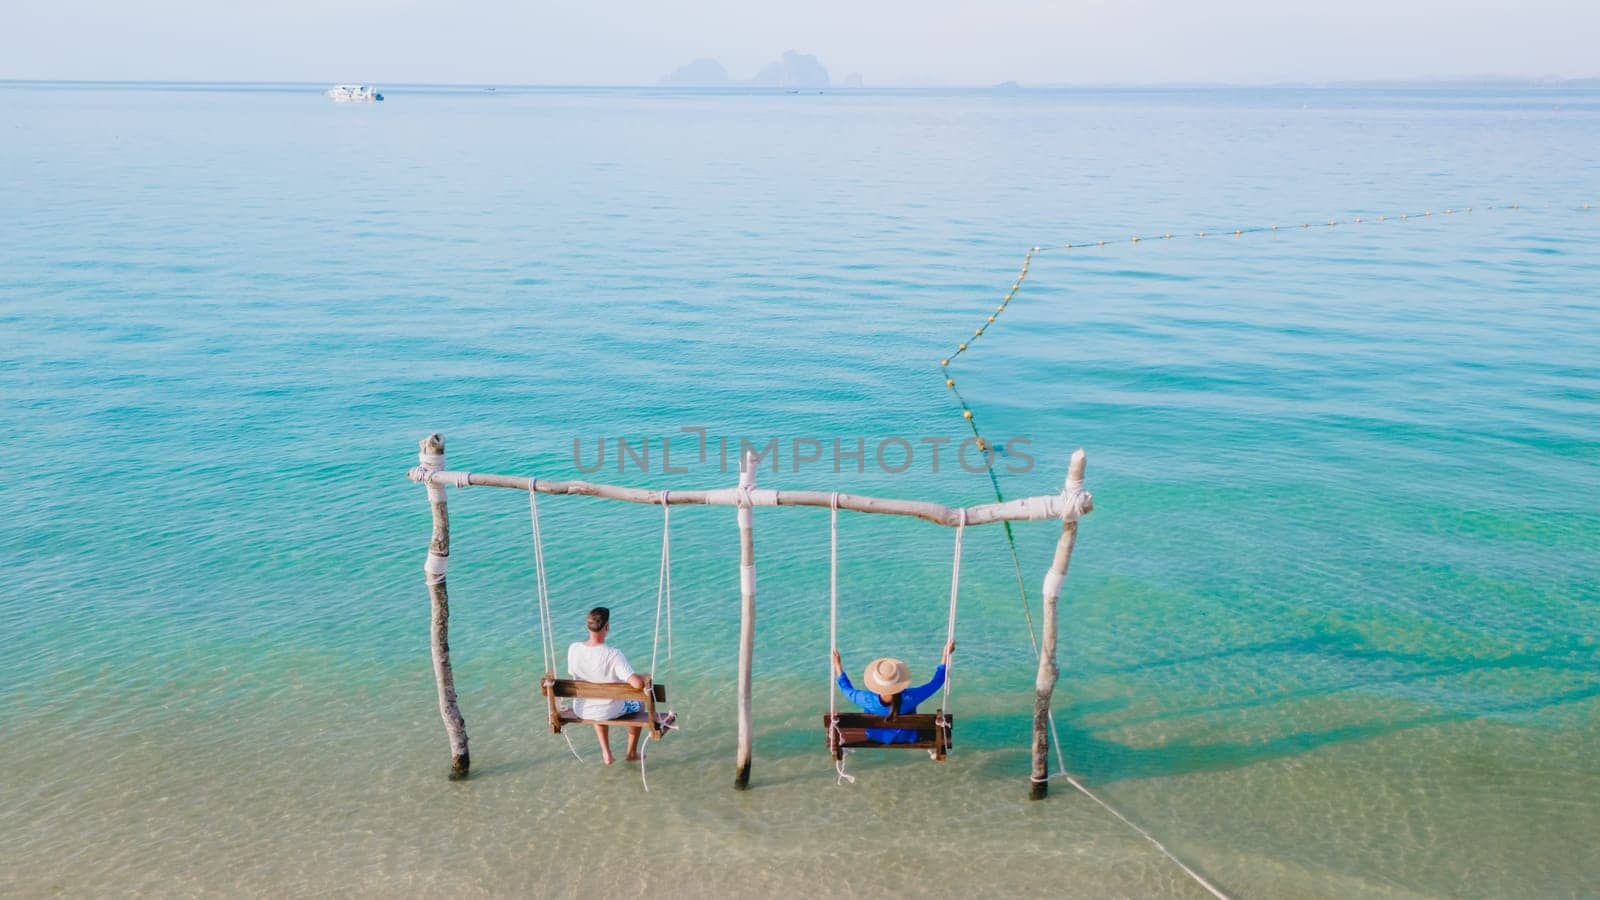 a couple of men and a woman on a swing at the beach of Koh Muk a tropical island with palm trees soft white sand, and a turqouse ocean, Koh Mook Trang Thailand, a couple on a swing in the ocean sunset